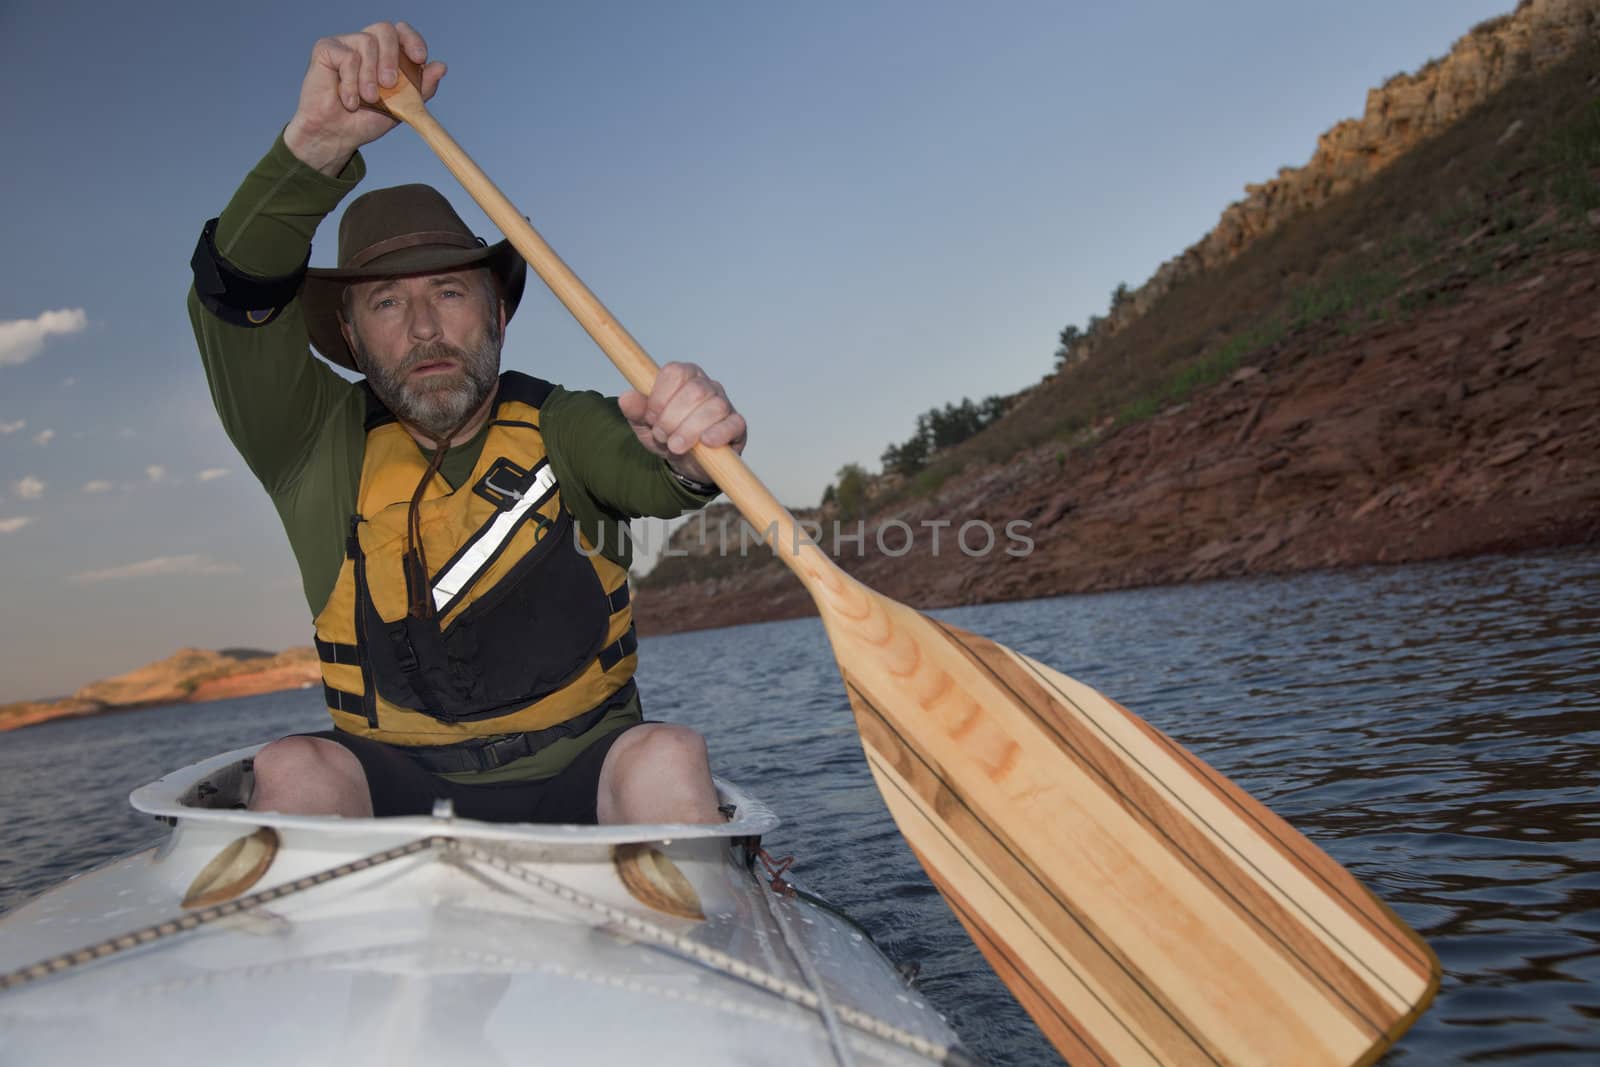 mature male paddling a white decked expedition canoe with wooden paddle on mountain lake with red sandstone cliffs (Horsetooth Reservoir near Fort Collins, Colorado)